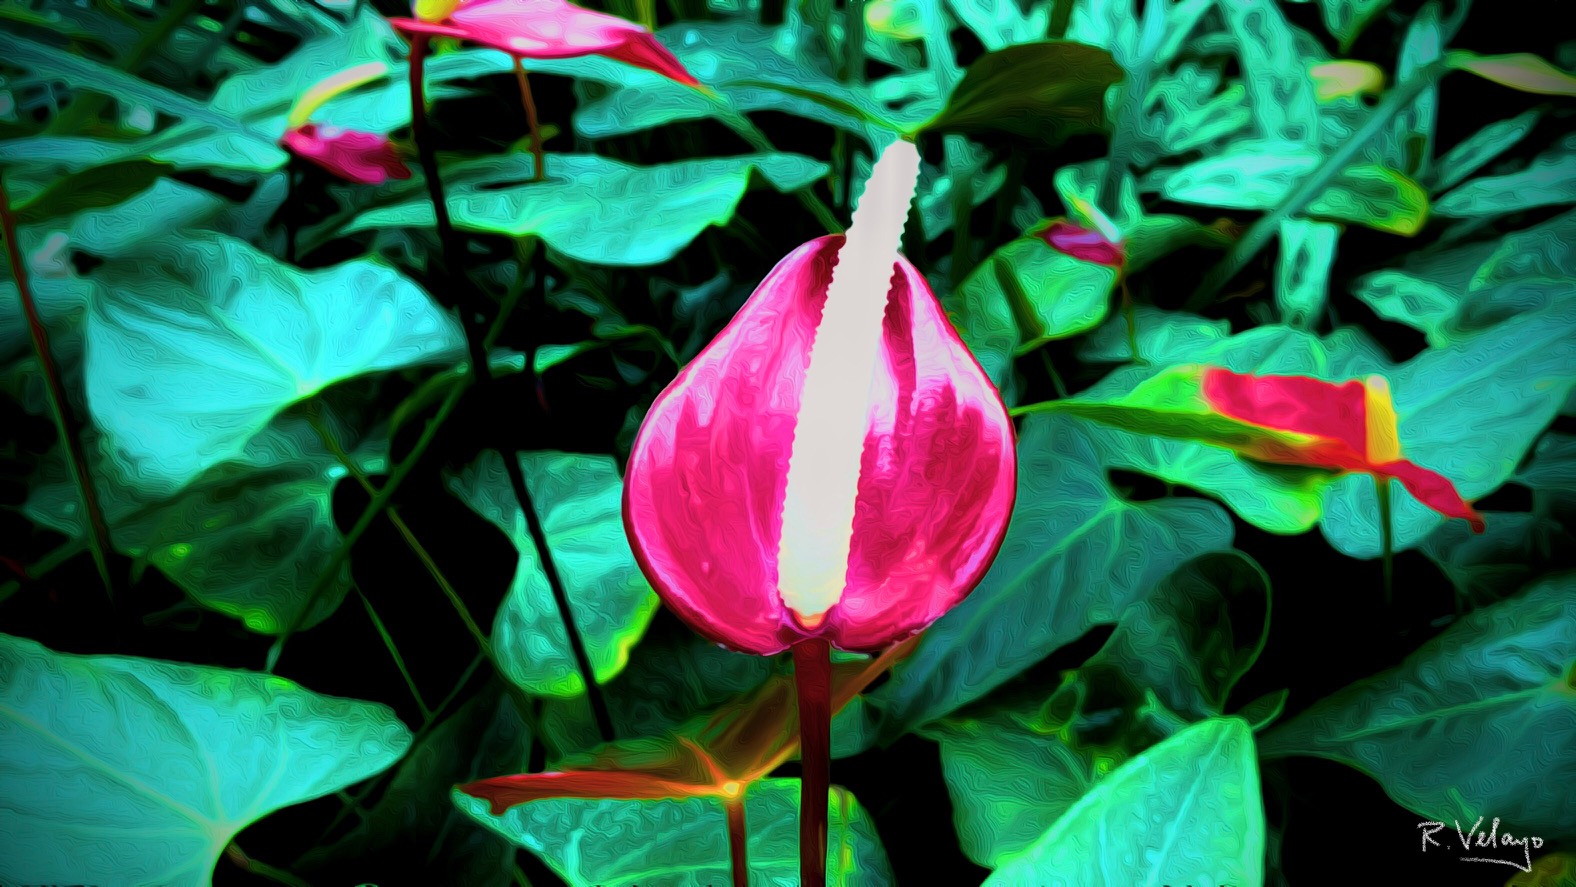 "A RED ANTHURIUM FLOWER AT GAYLORD PALMS" [Created: 9/13/2021]